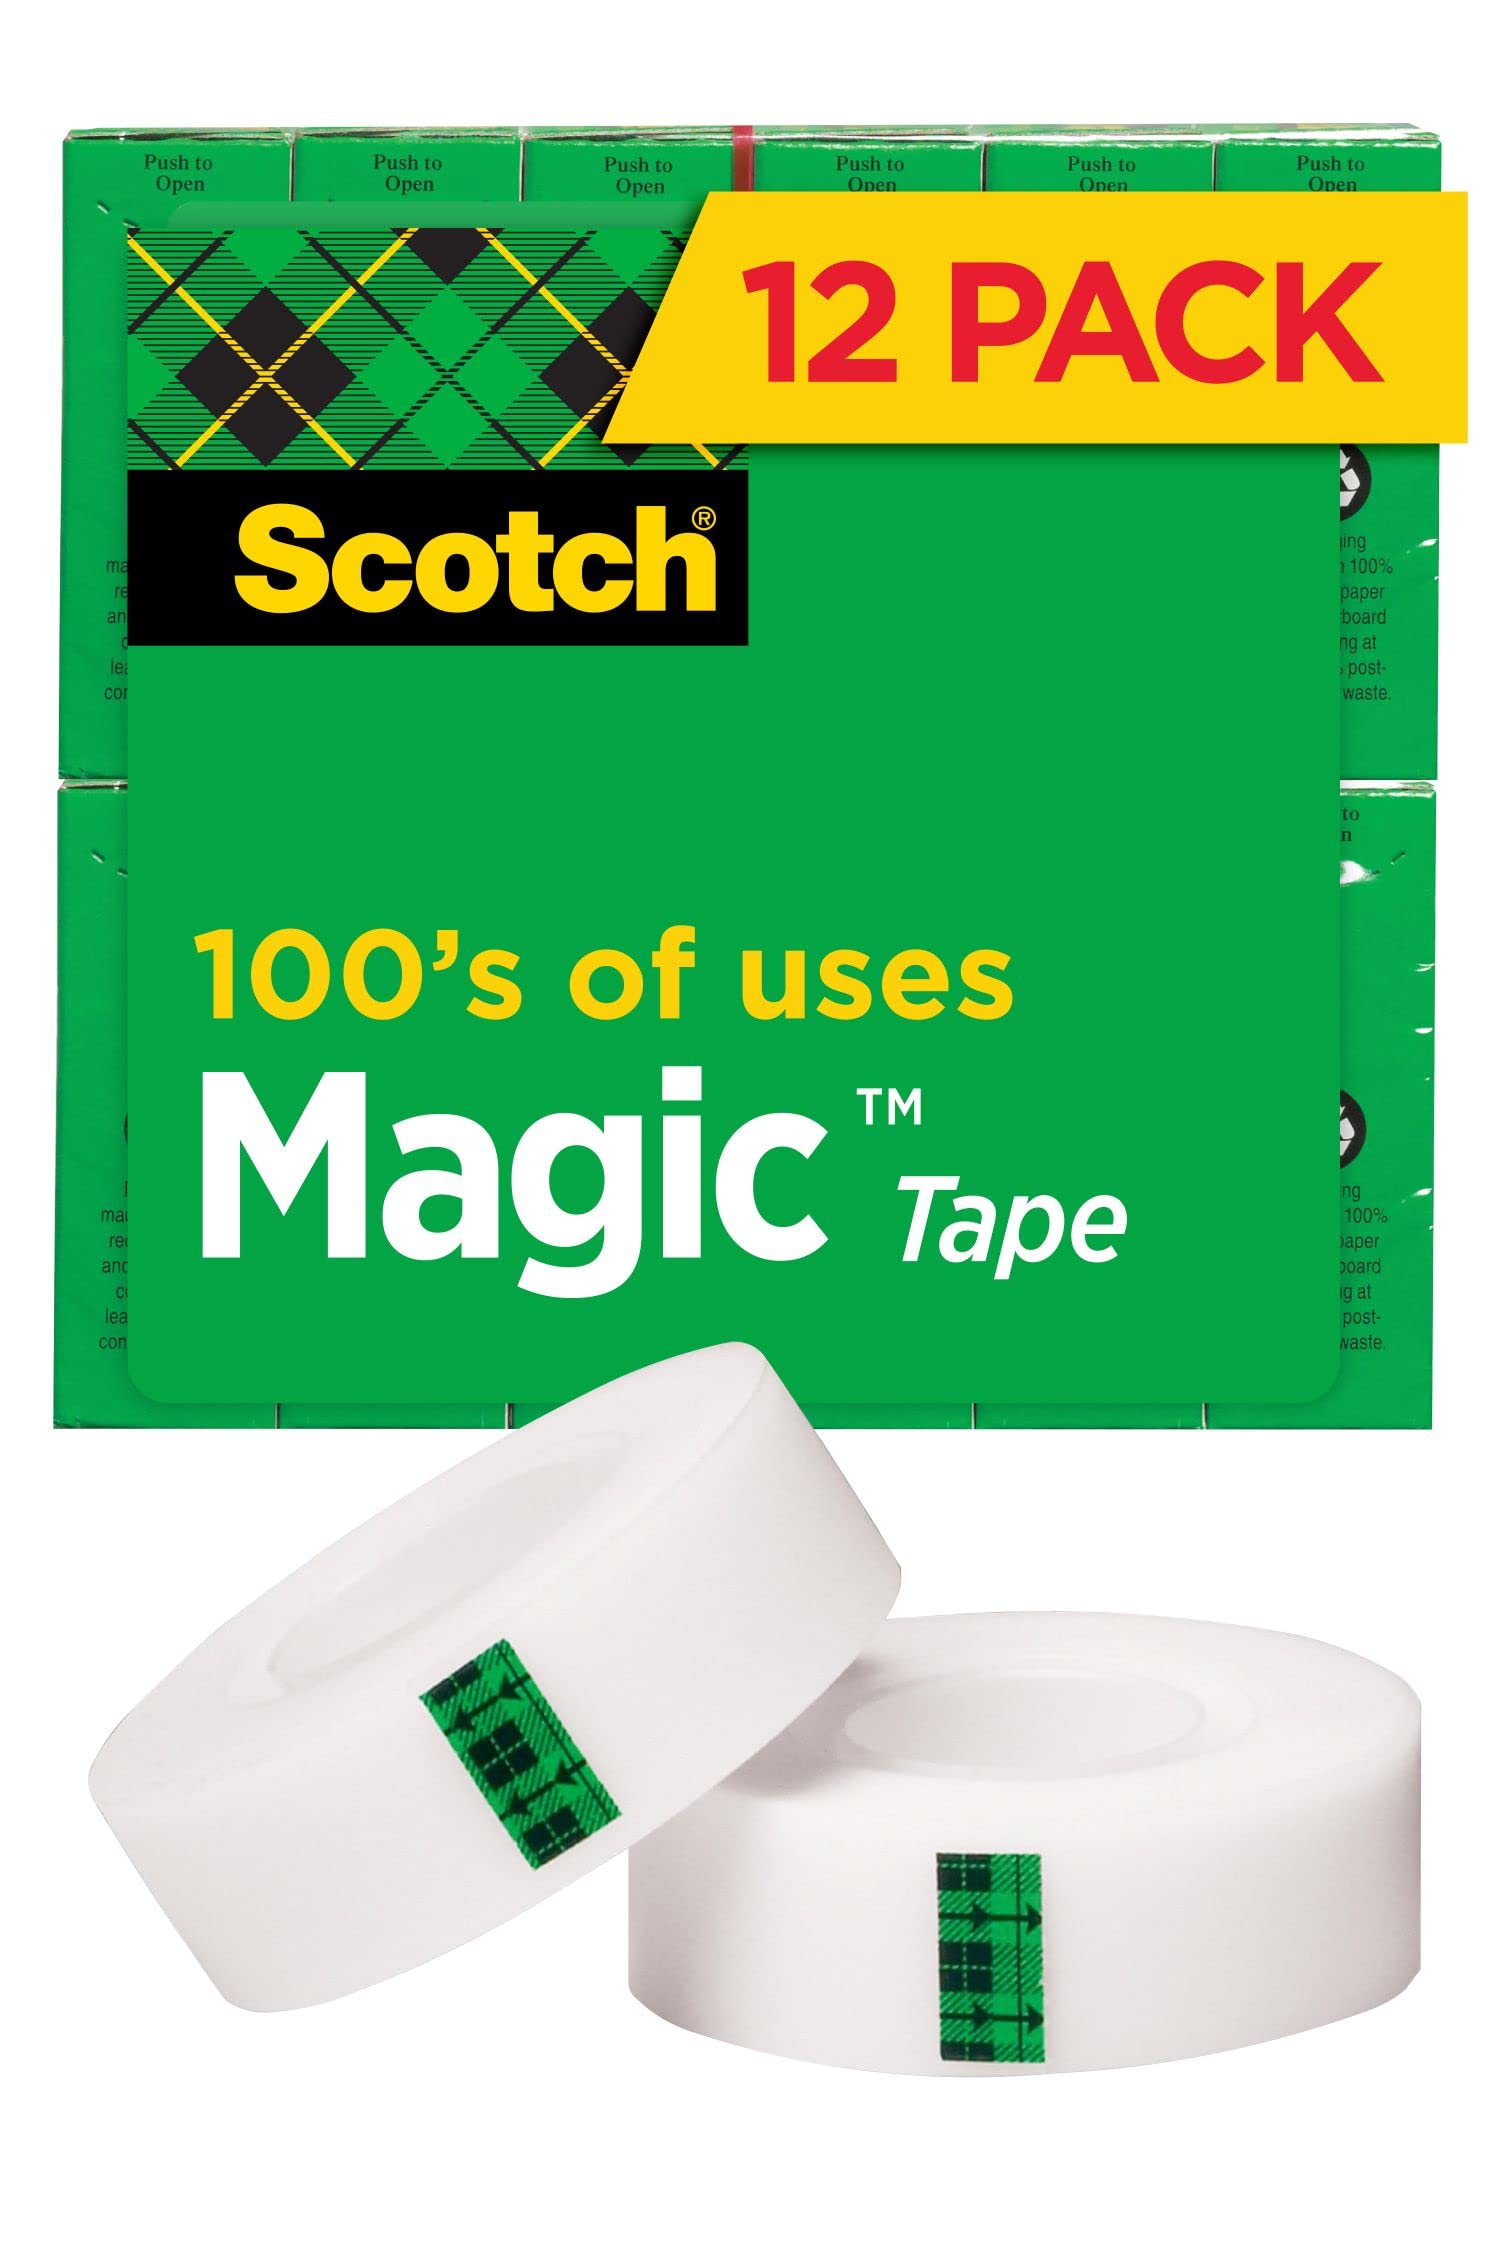 Double Sided Tape for Cricket Mats [12 Rolls]